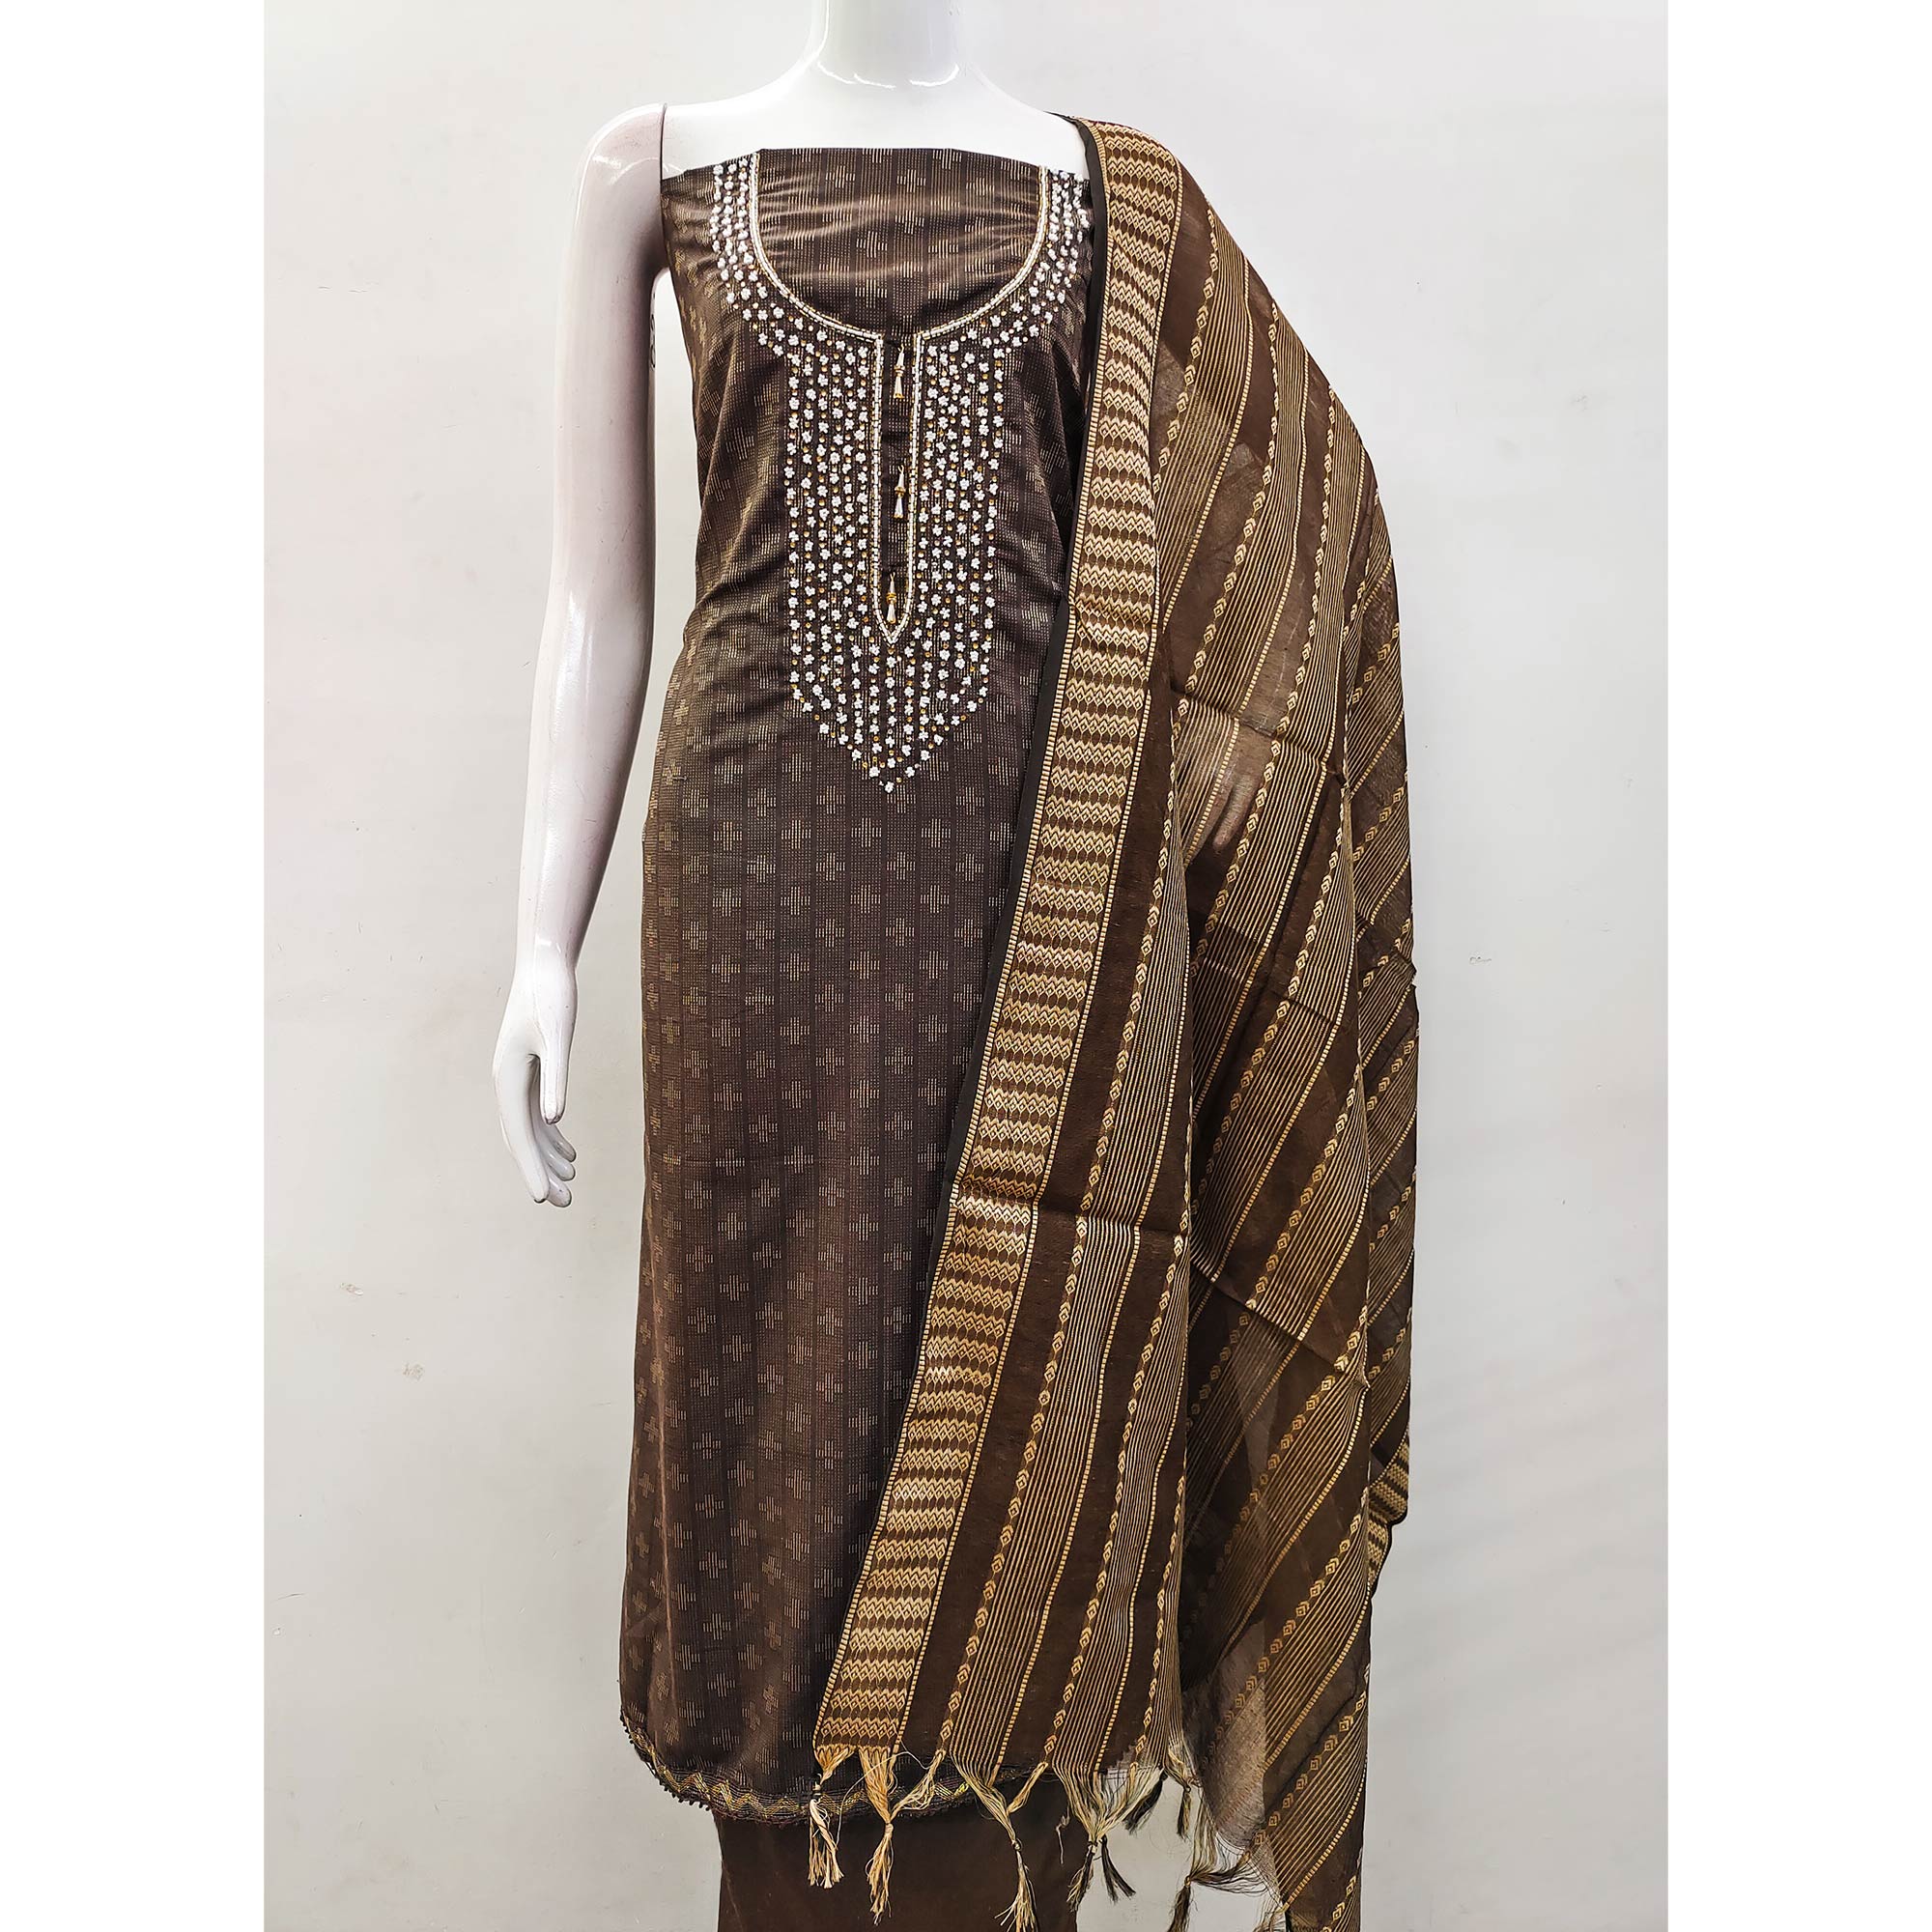 Brown Woven With Handwork Cotton Blend Dress Material